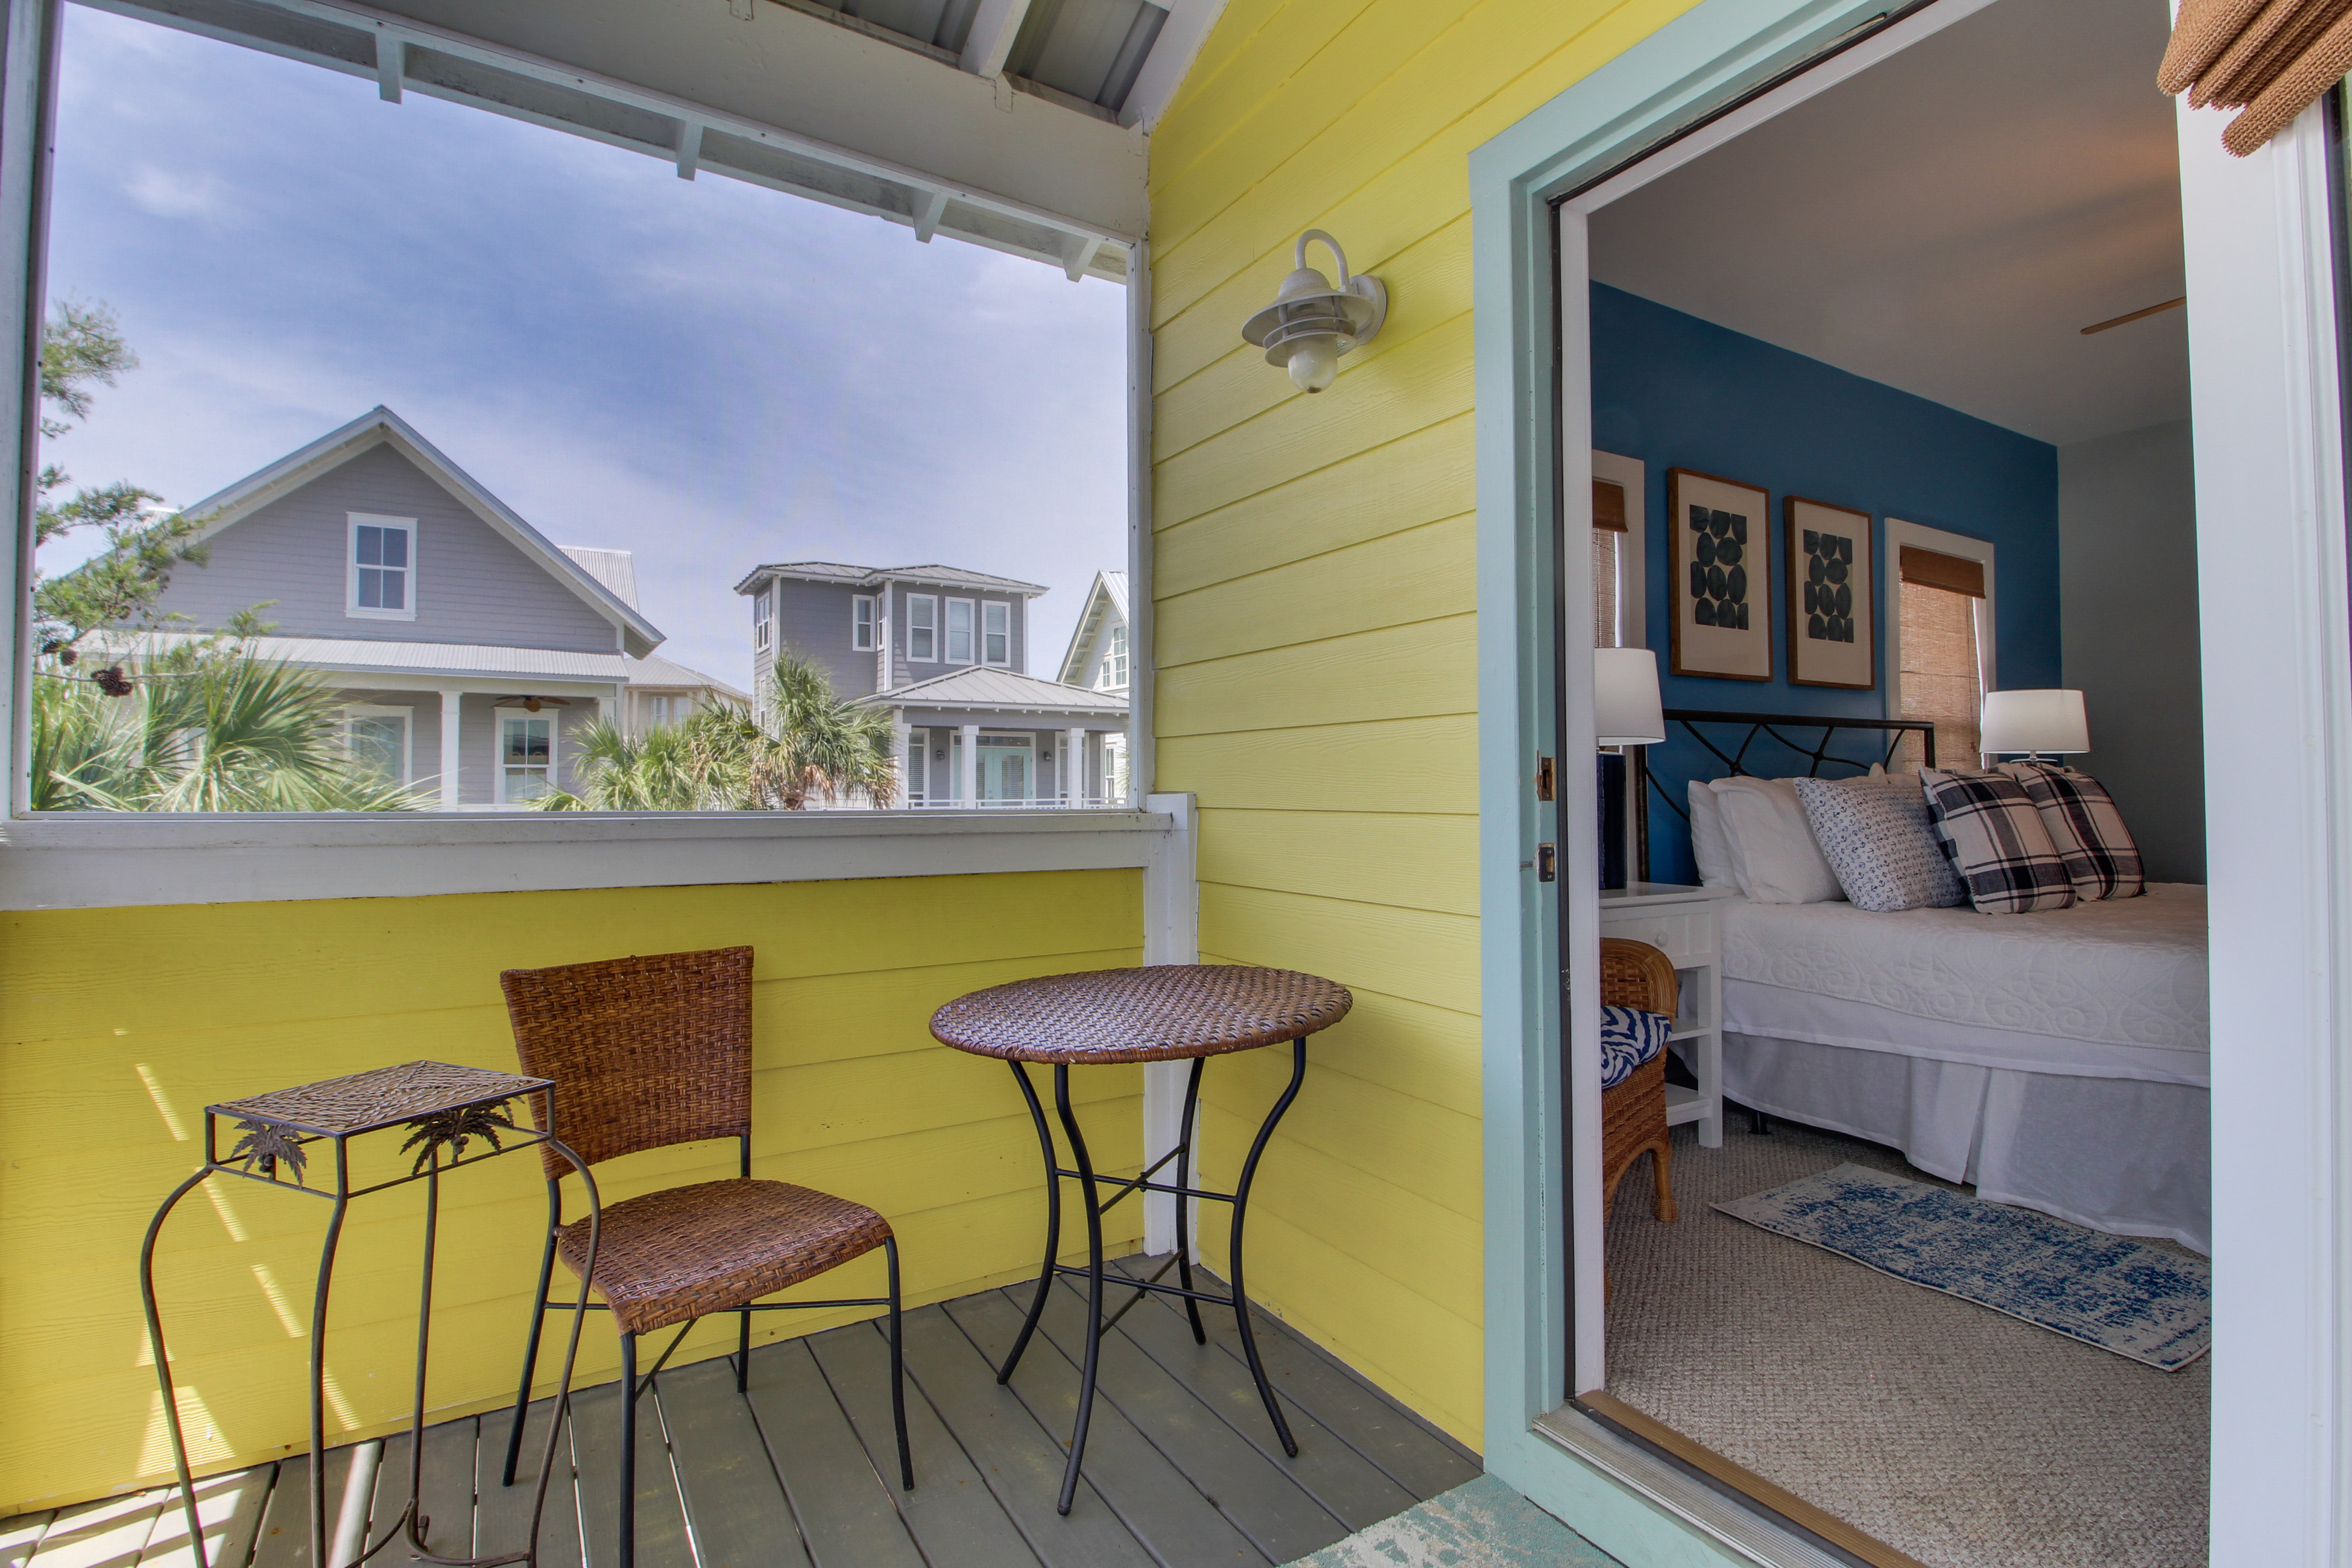 The Lemon Drop - Main House House / Cottage rental in 30a Beach House Rentals in Highway 30-A Florida - #33